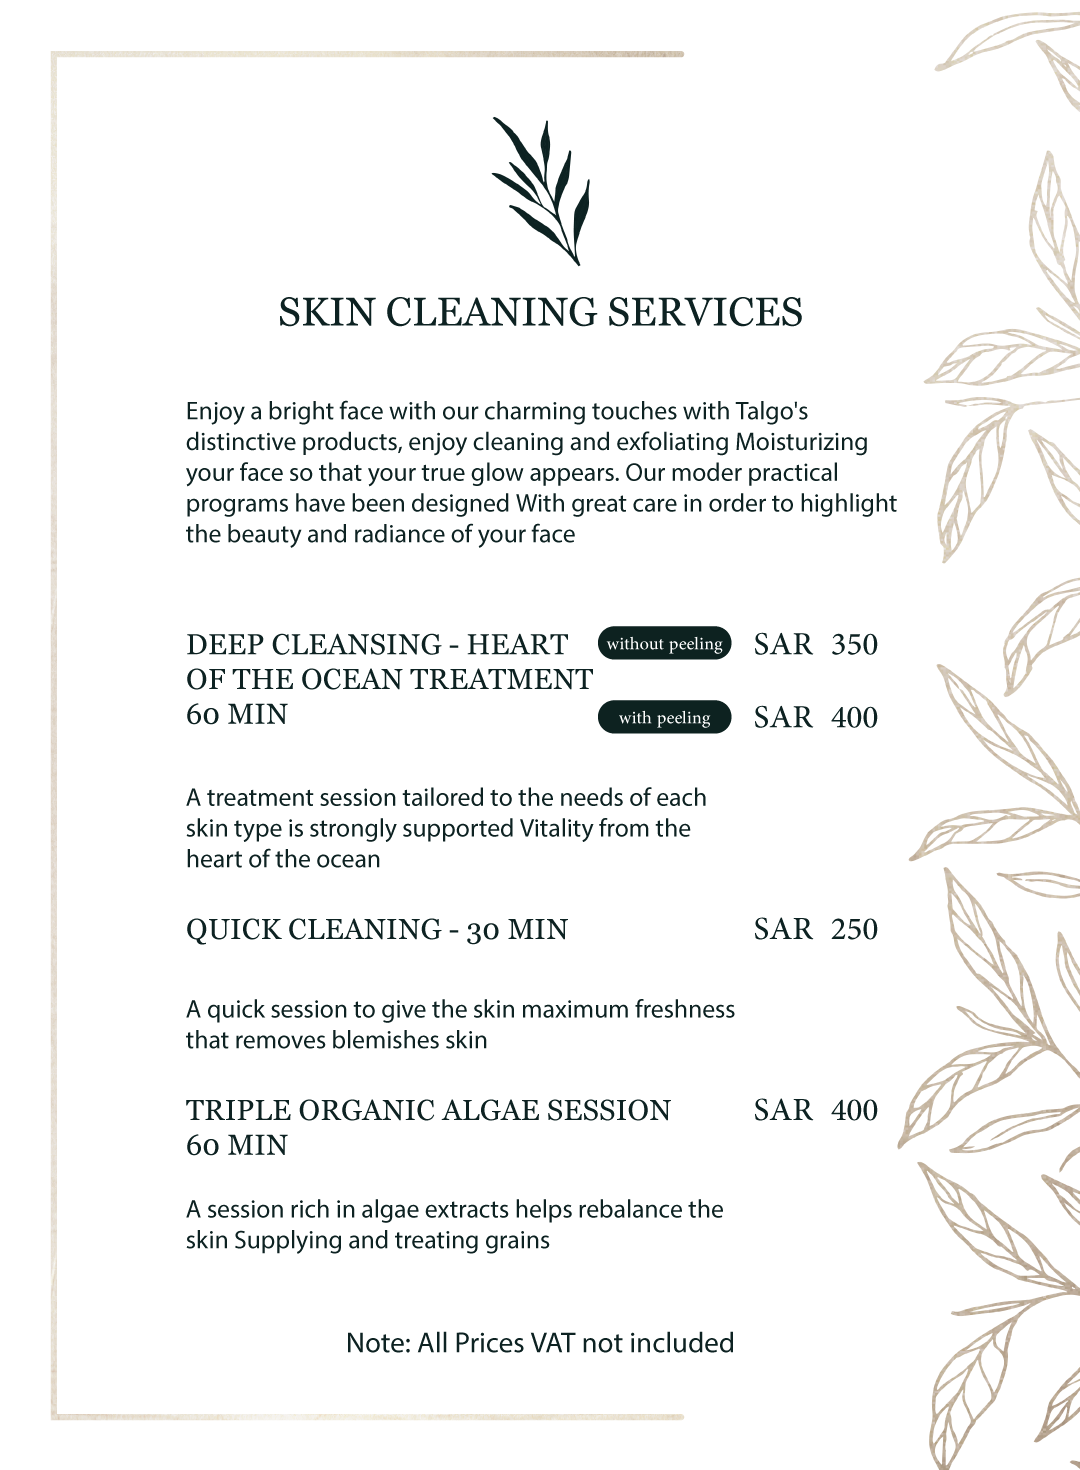 Skin cleaning services